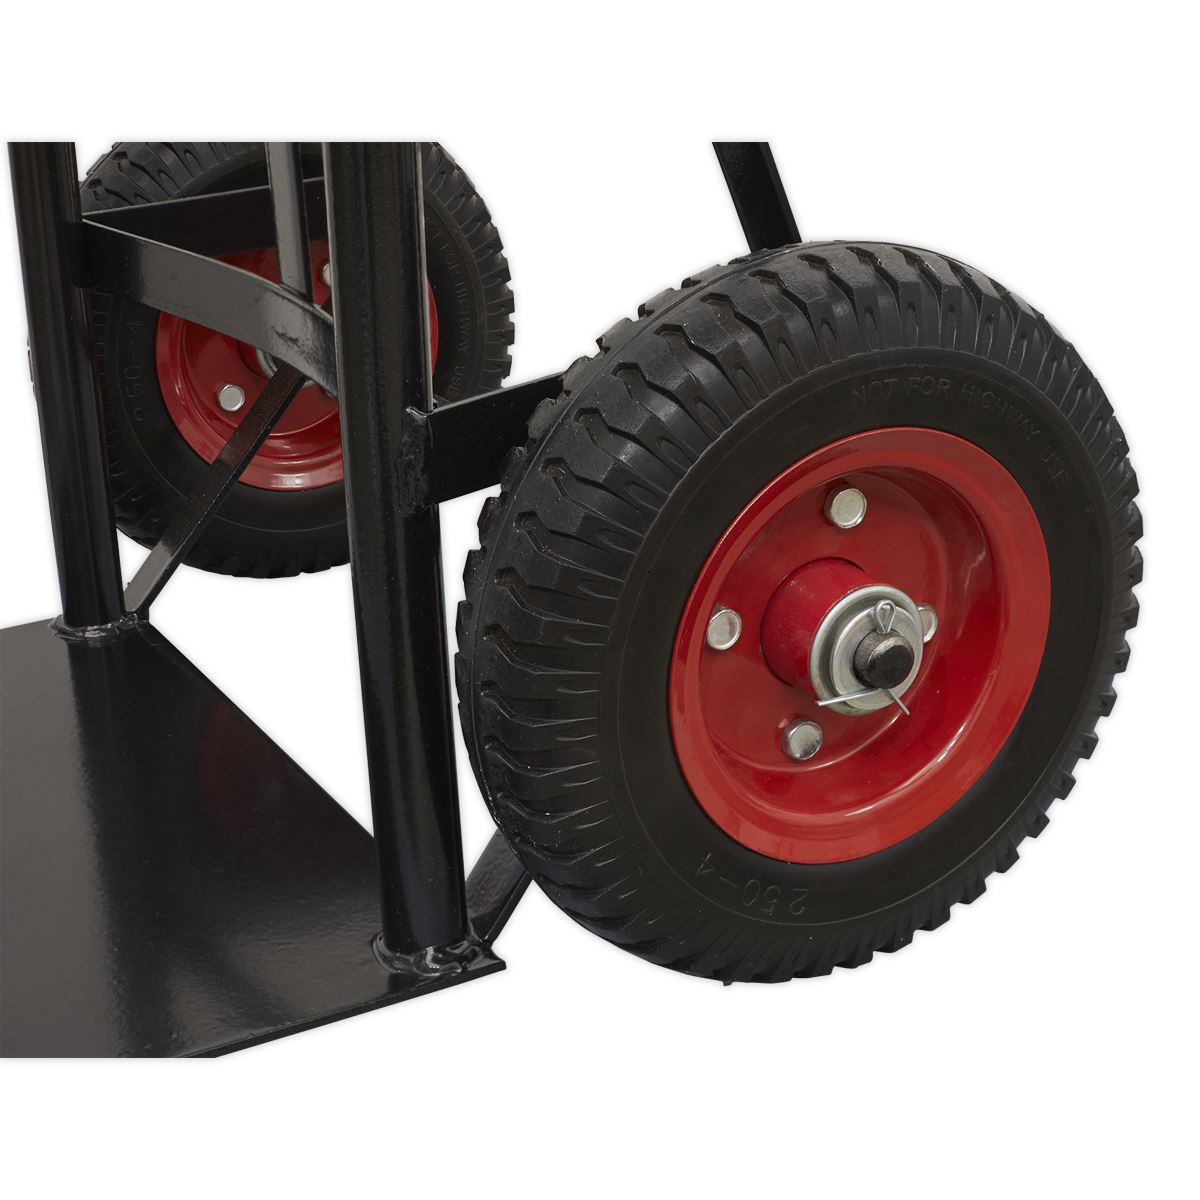 Sealey Premier Heavy-Duty Sack Truck with PU Tyres 200kg Capacity